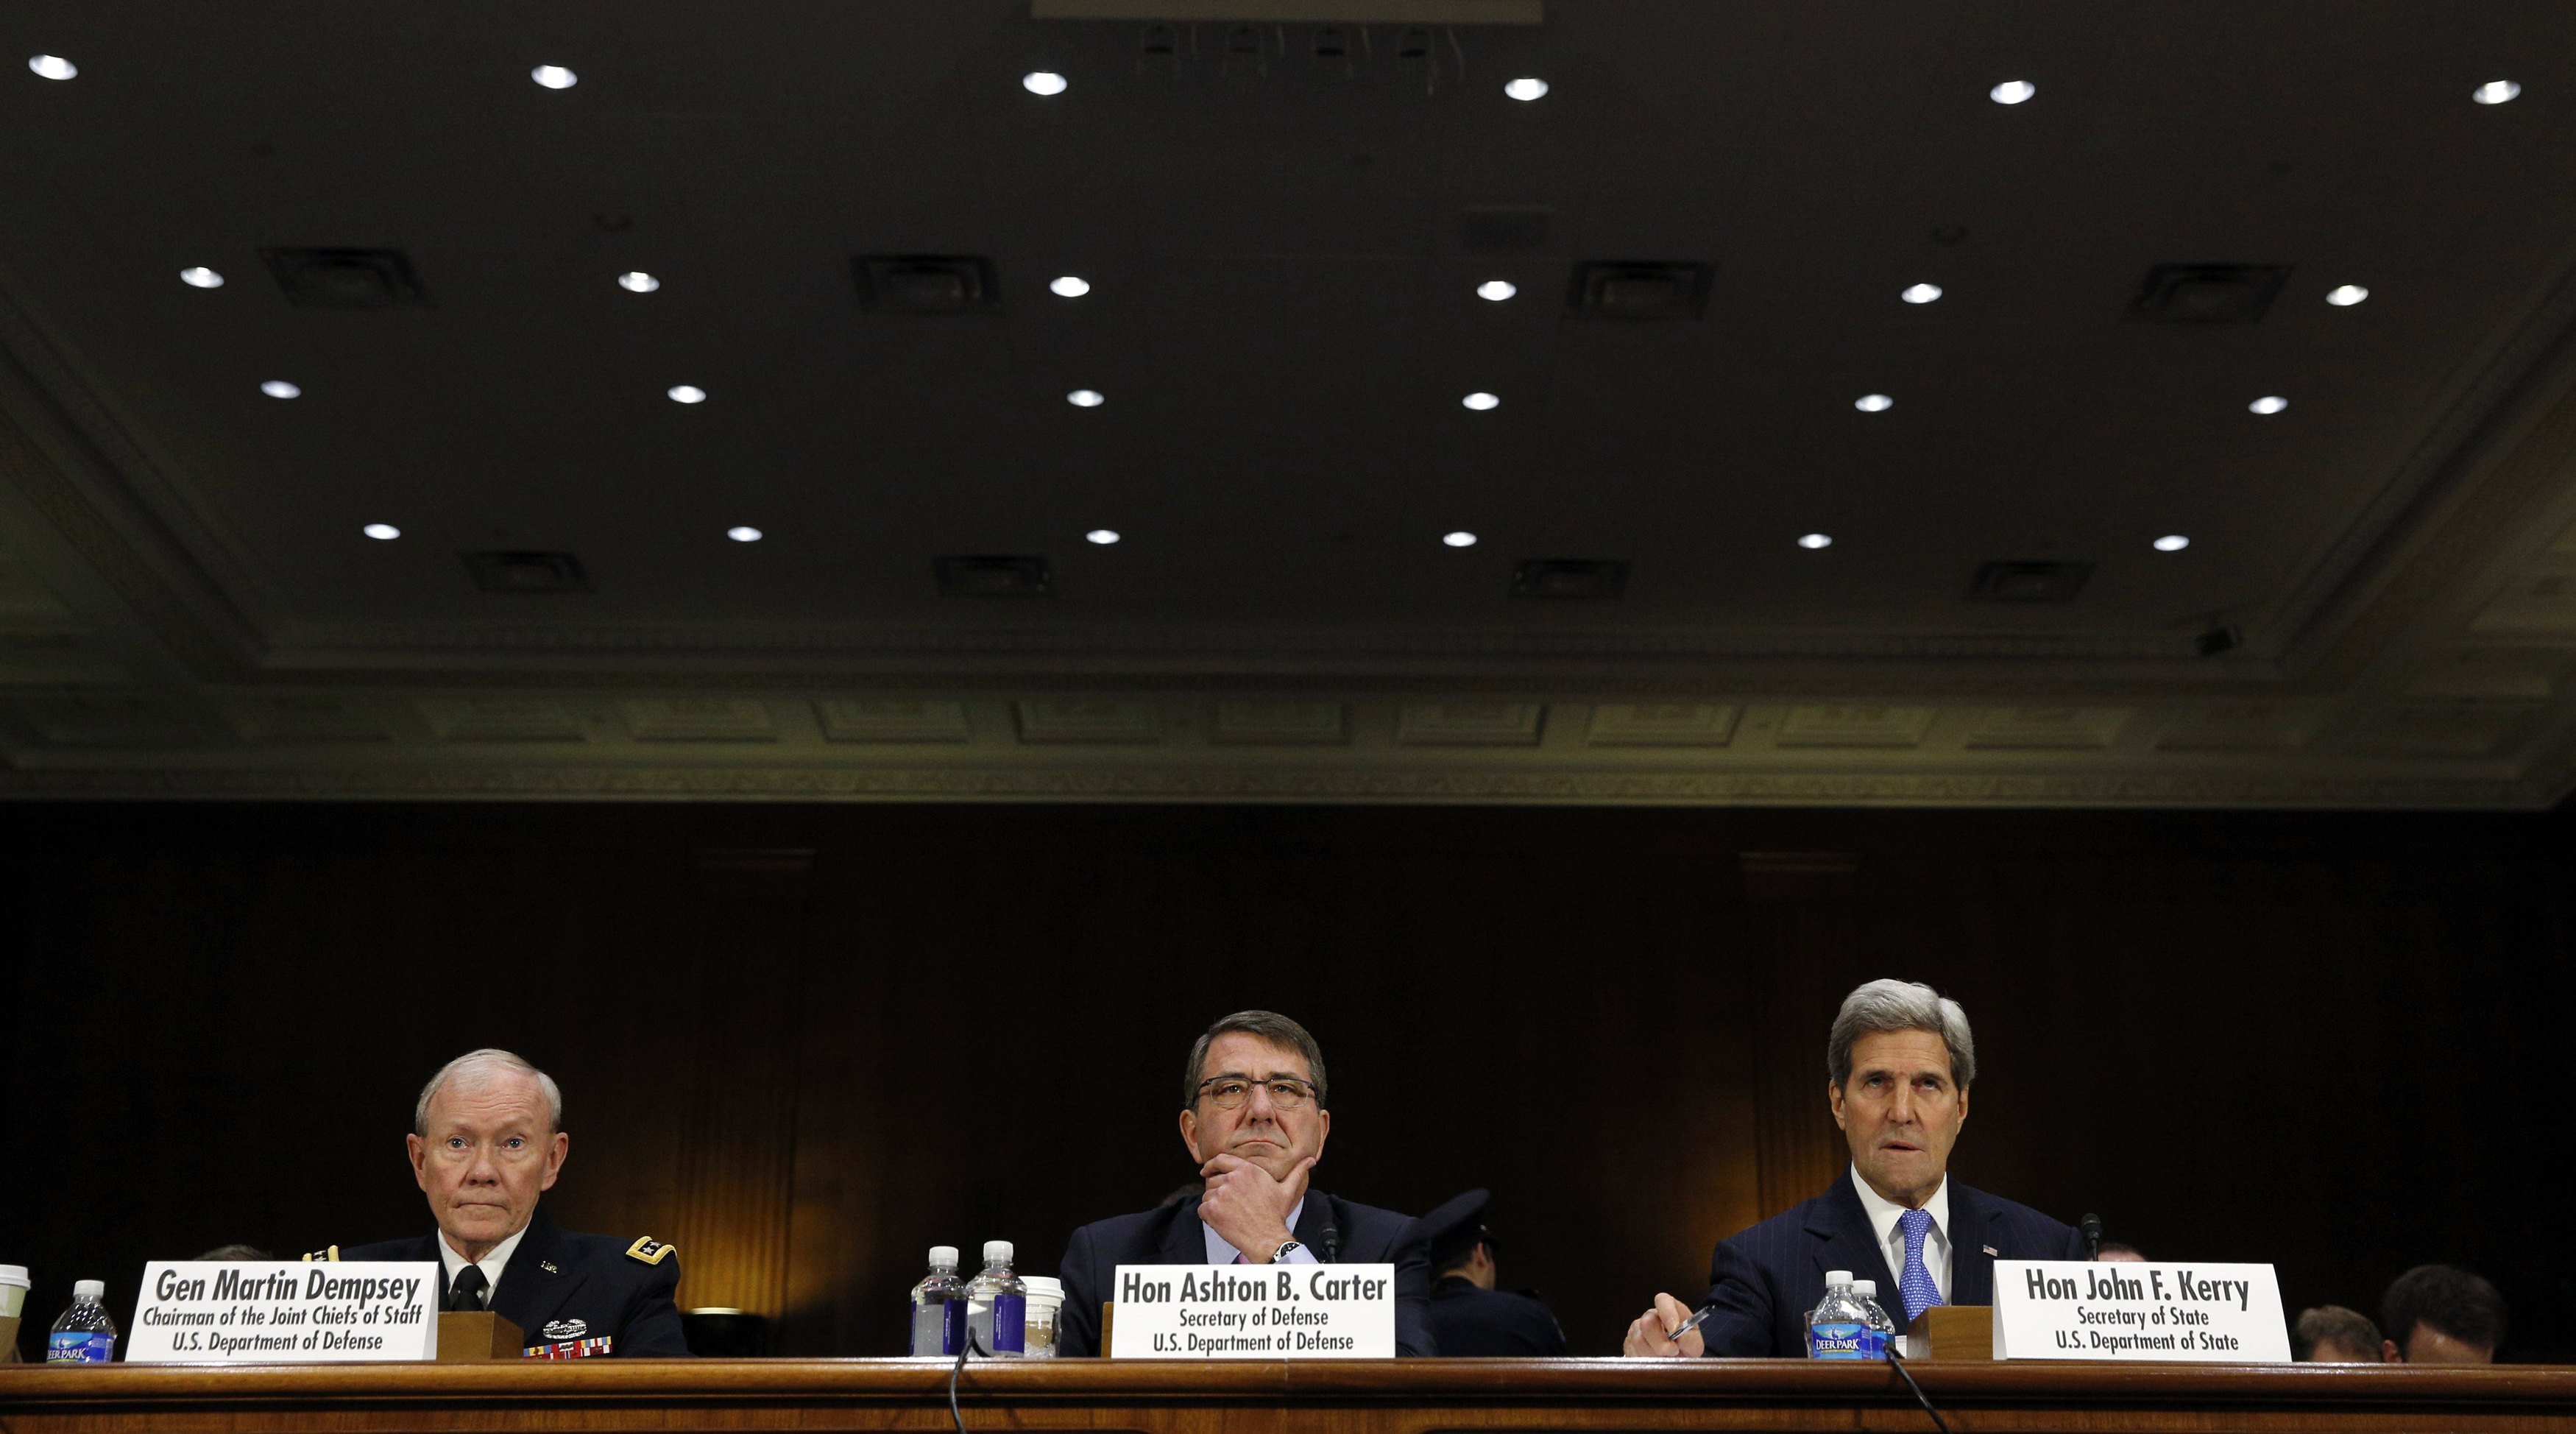 Joint Chiefs of Staff Chairman Army Gen. Martin Dempsey (L), U.S. Defense Secretary Ash Carter (C) and Secretary of State John Kerry testify at a Senate Foreign Relations Committee hearing on "The President's Request for Authorization to Use Force Against ISIS: Military and Diplomatic Efforts" on Capitol Hill in Washington on March 11, 2015.